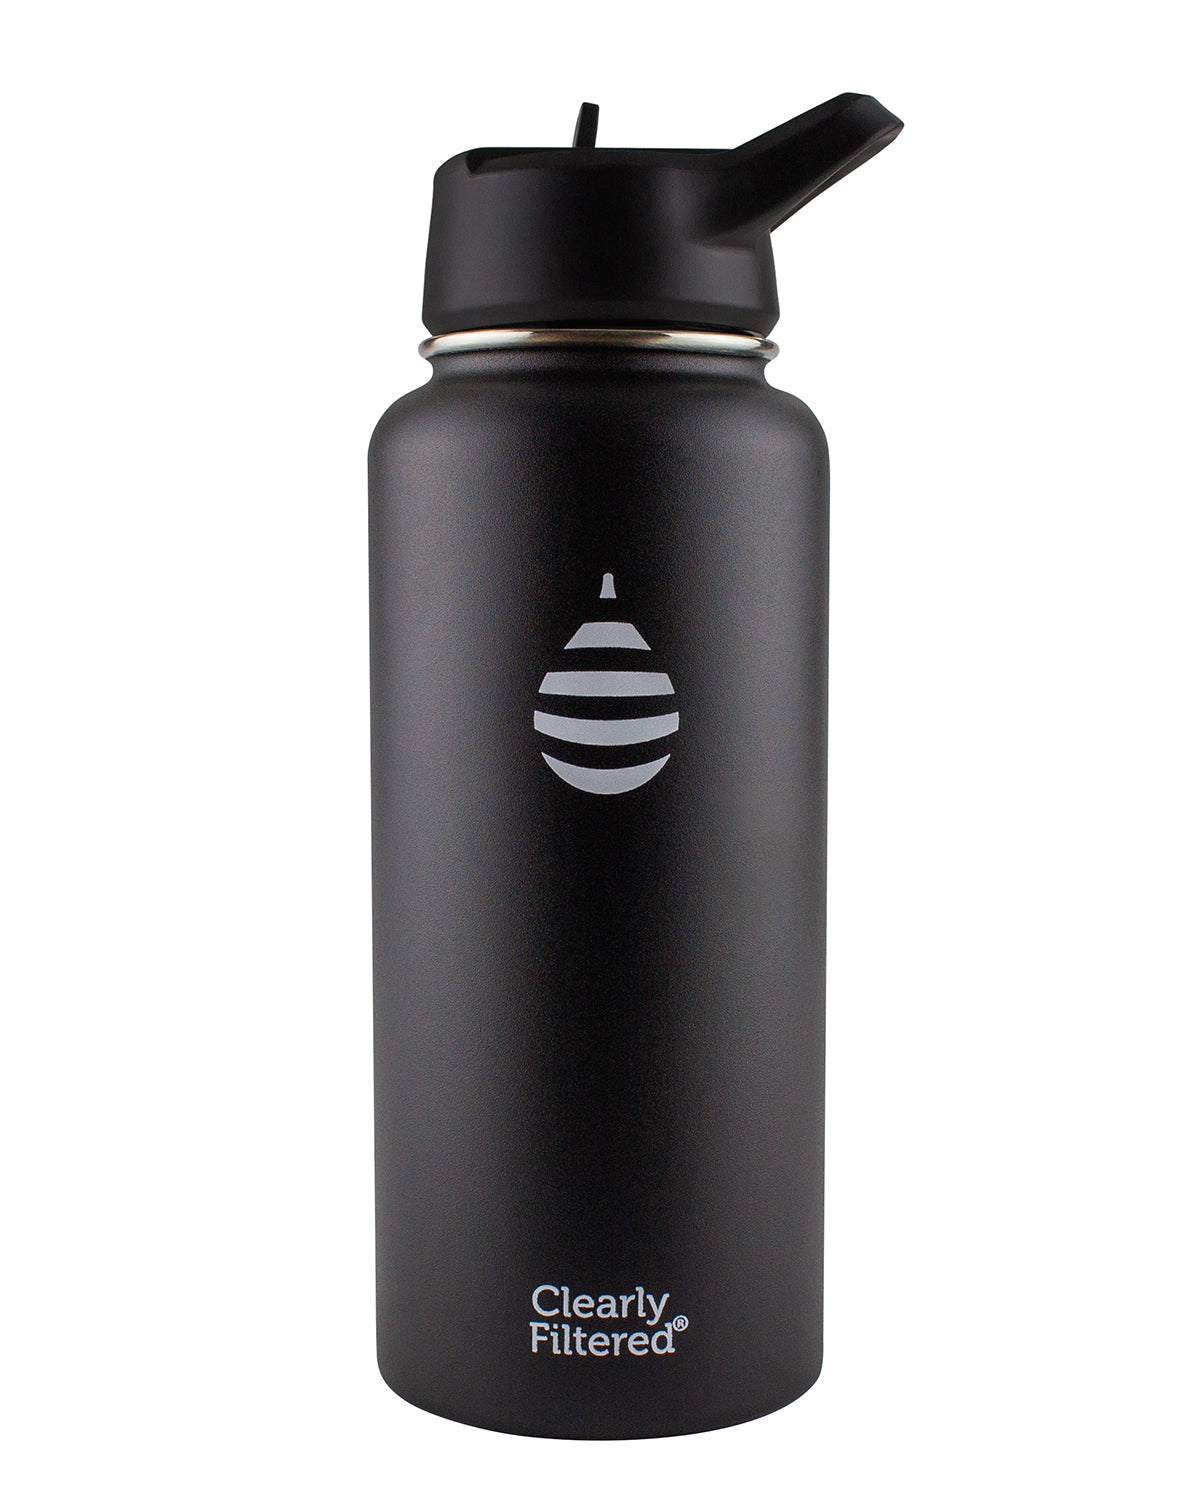 32oz Stainless Steel Filtered Water Bottle